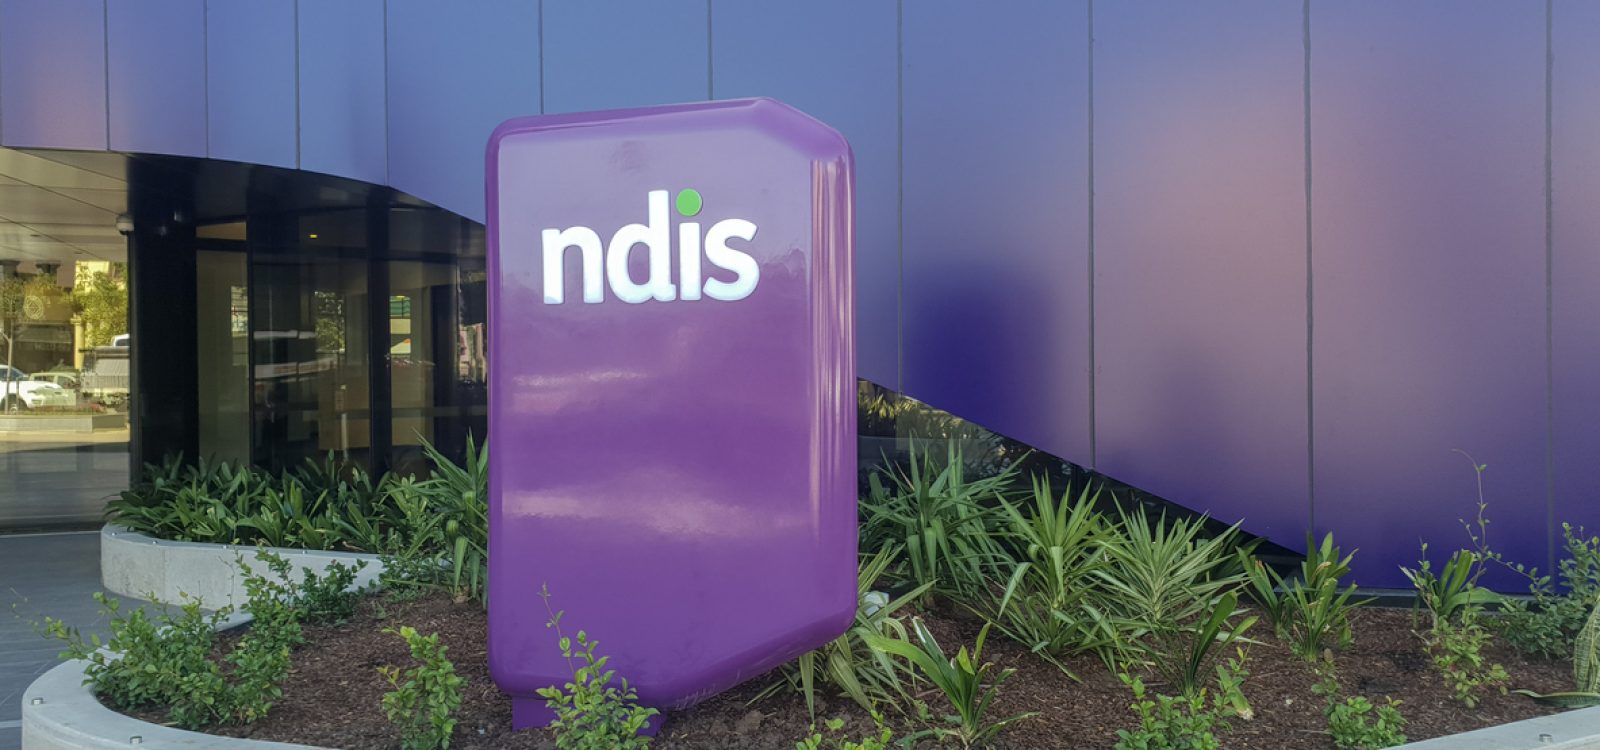 We need to talk about the NDIS